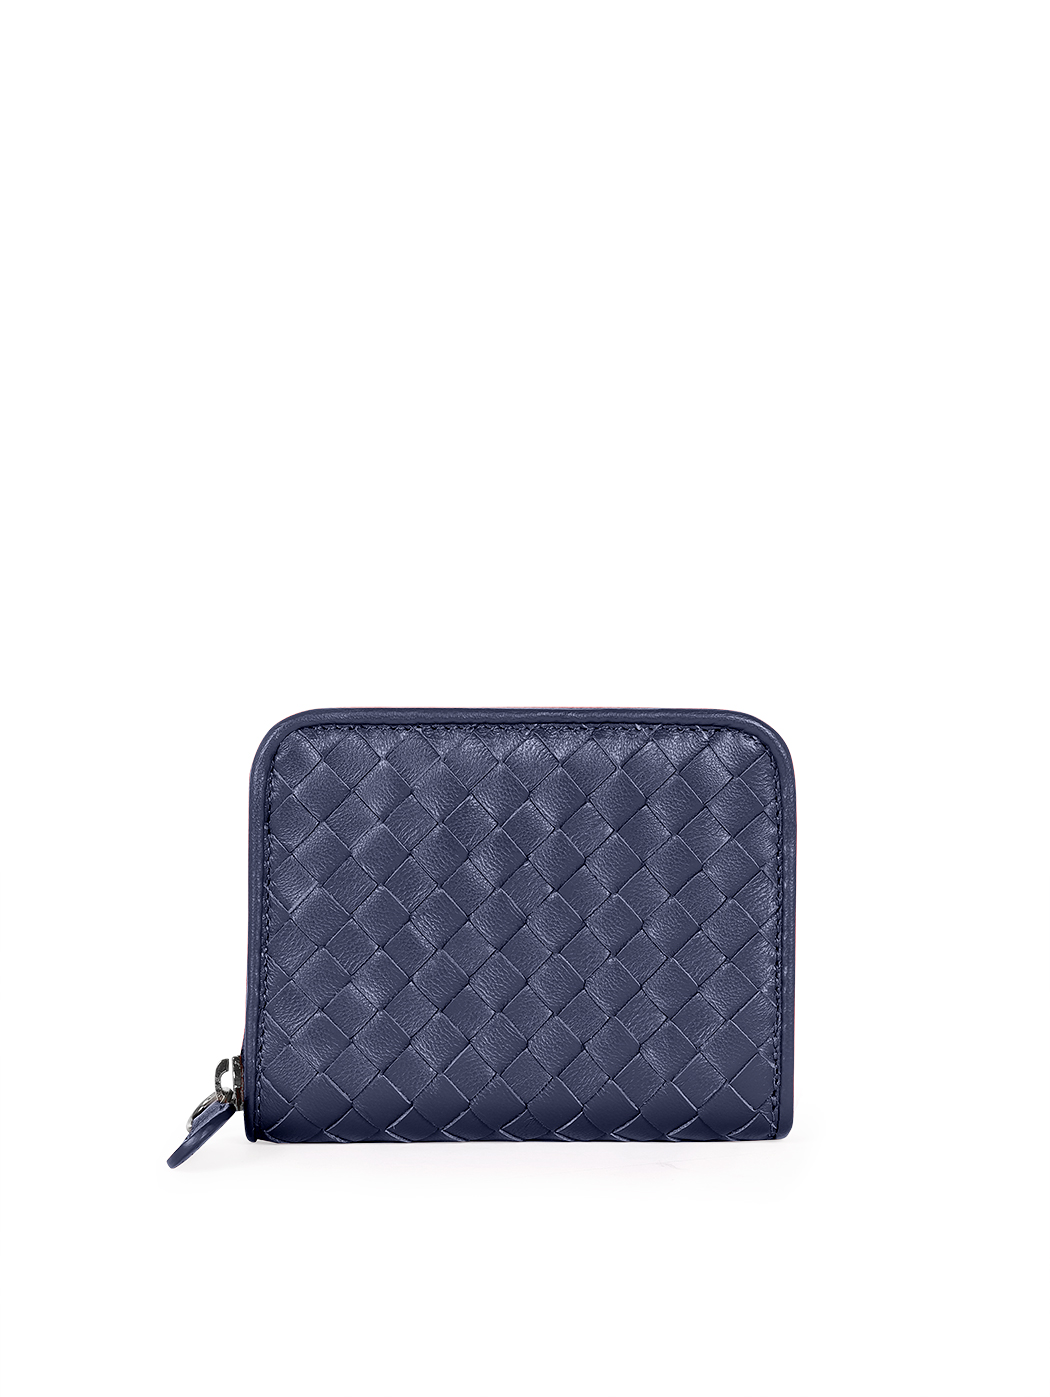 Compact zip-around wallet in light blue woven leather